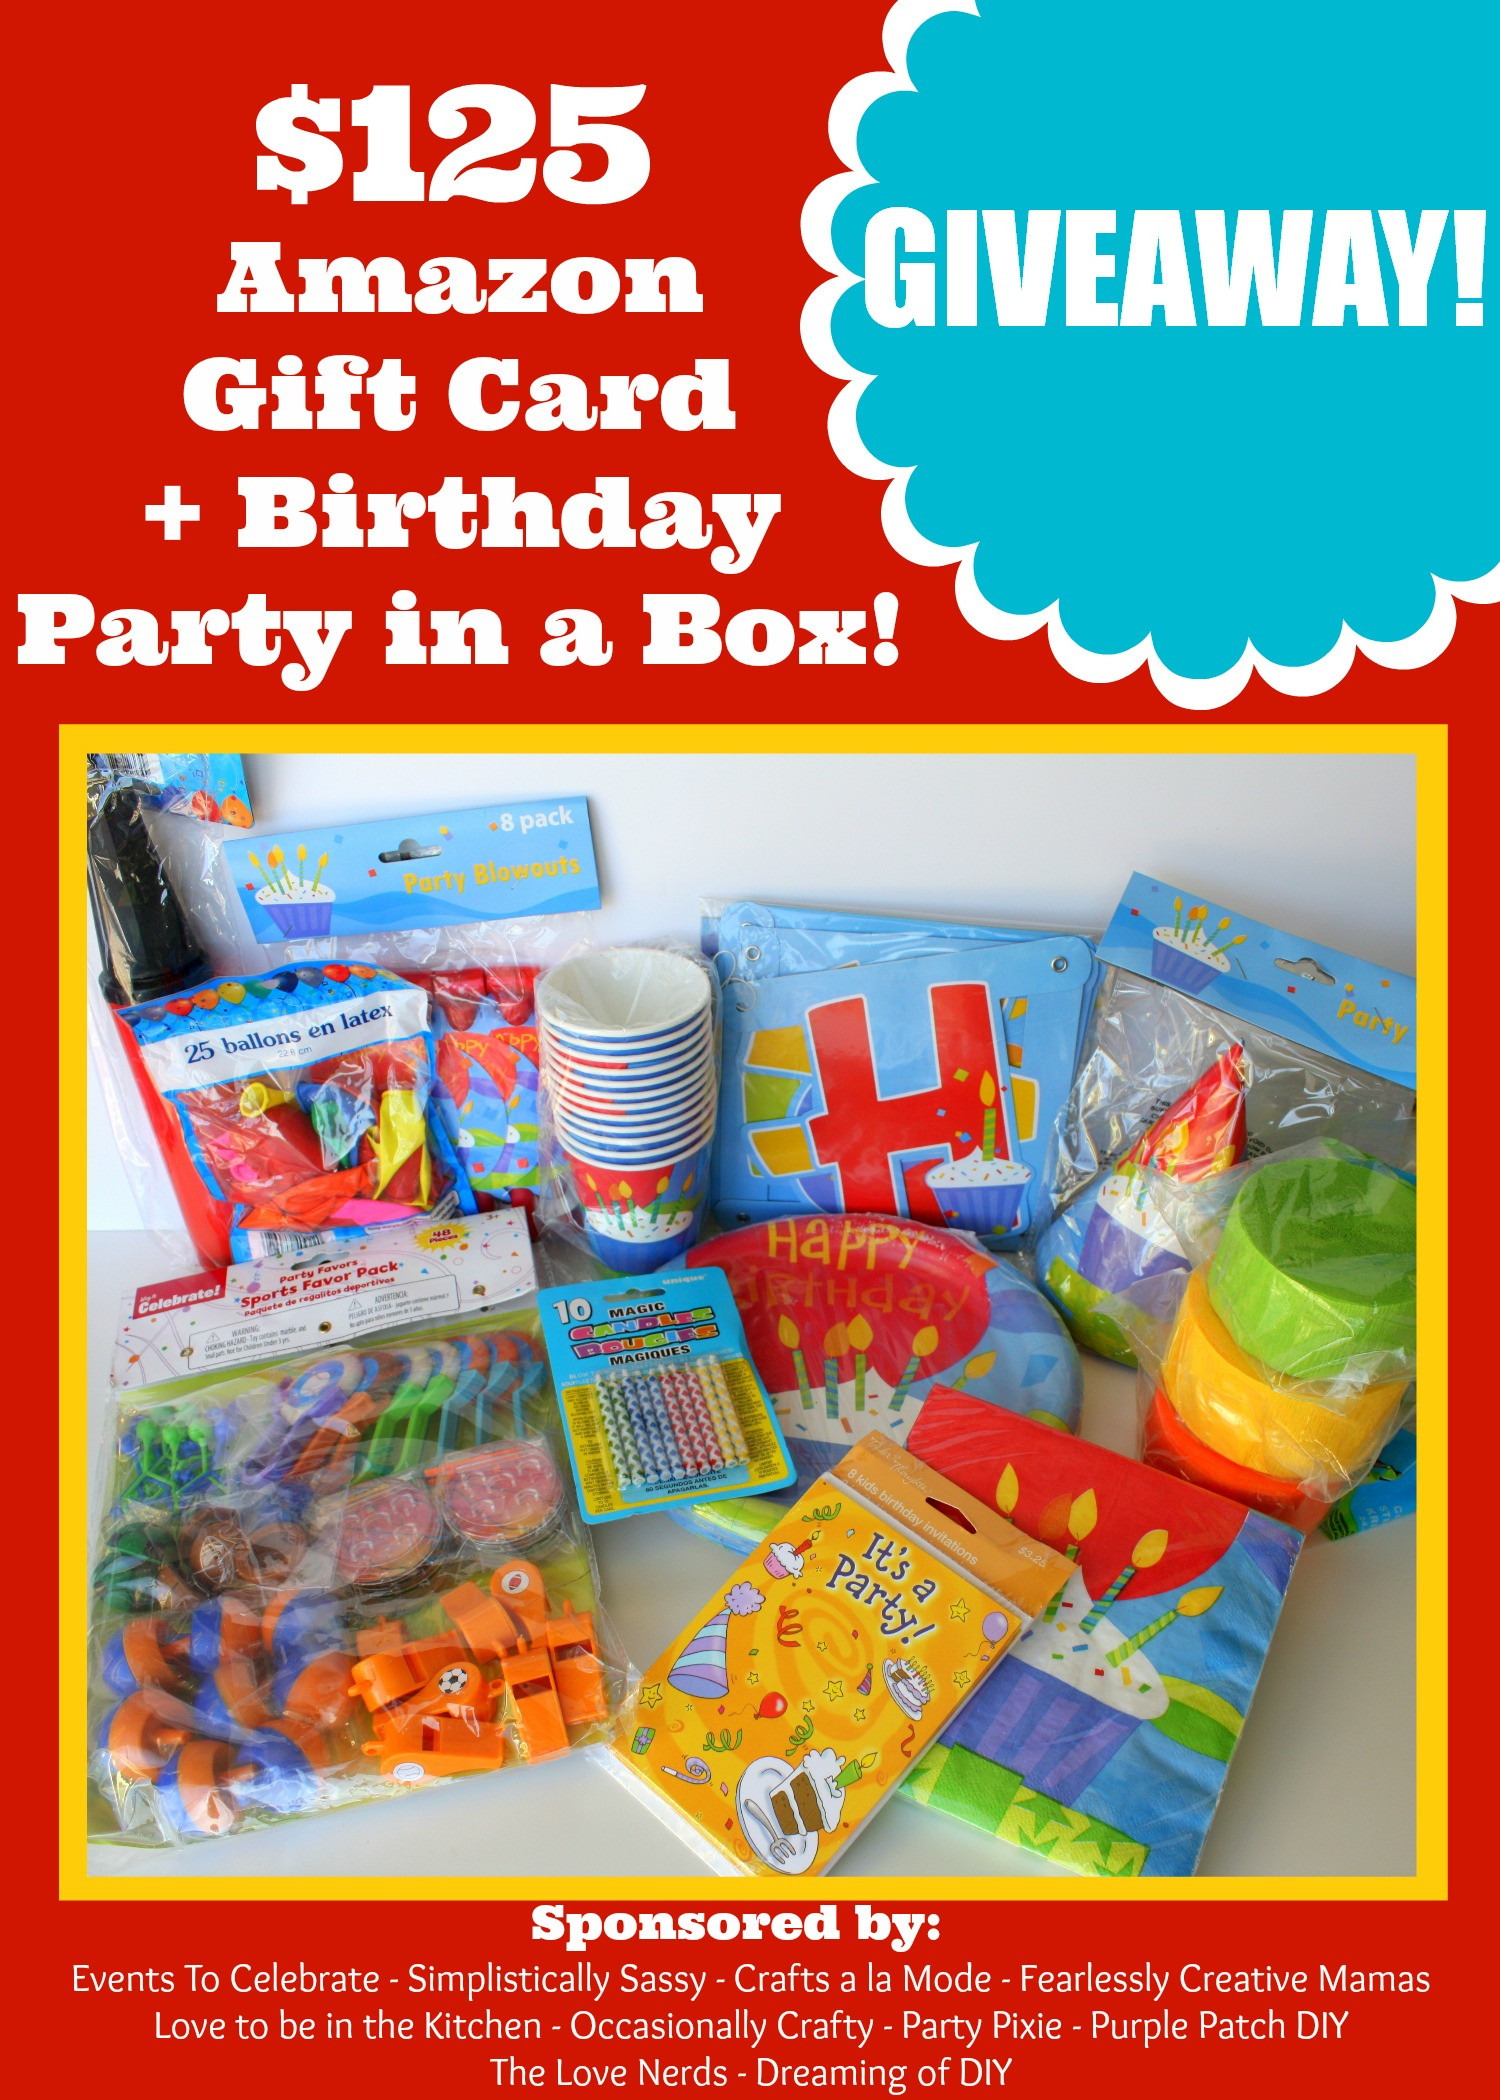 Best ideas about Birthday Party In A Box
. Save or Pin Giveaway $125 Amazon Gift Card and Party in a Box Now.